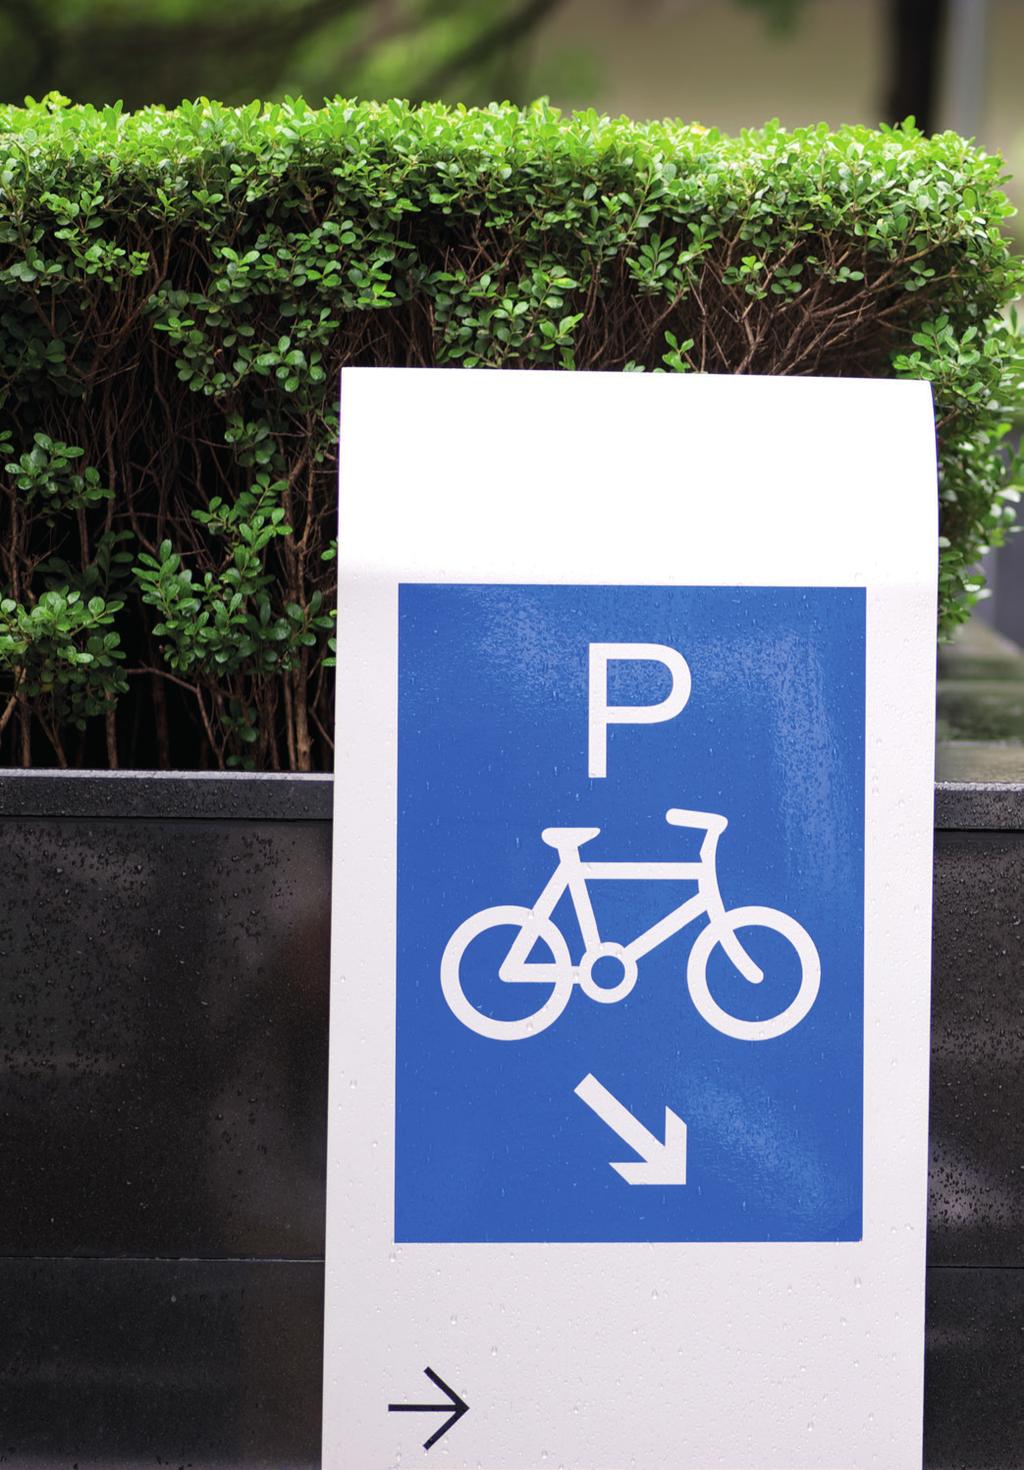 LOCATION, LOCATION, LOCATION! Location is everything when it comes to bicycle parking. Where you install your bike rack has to be safe and convenient for cyclists.